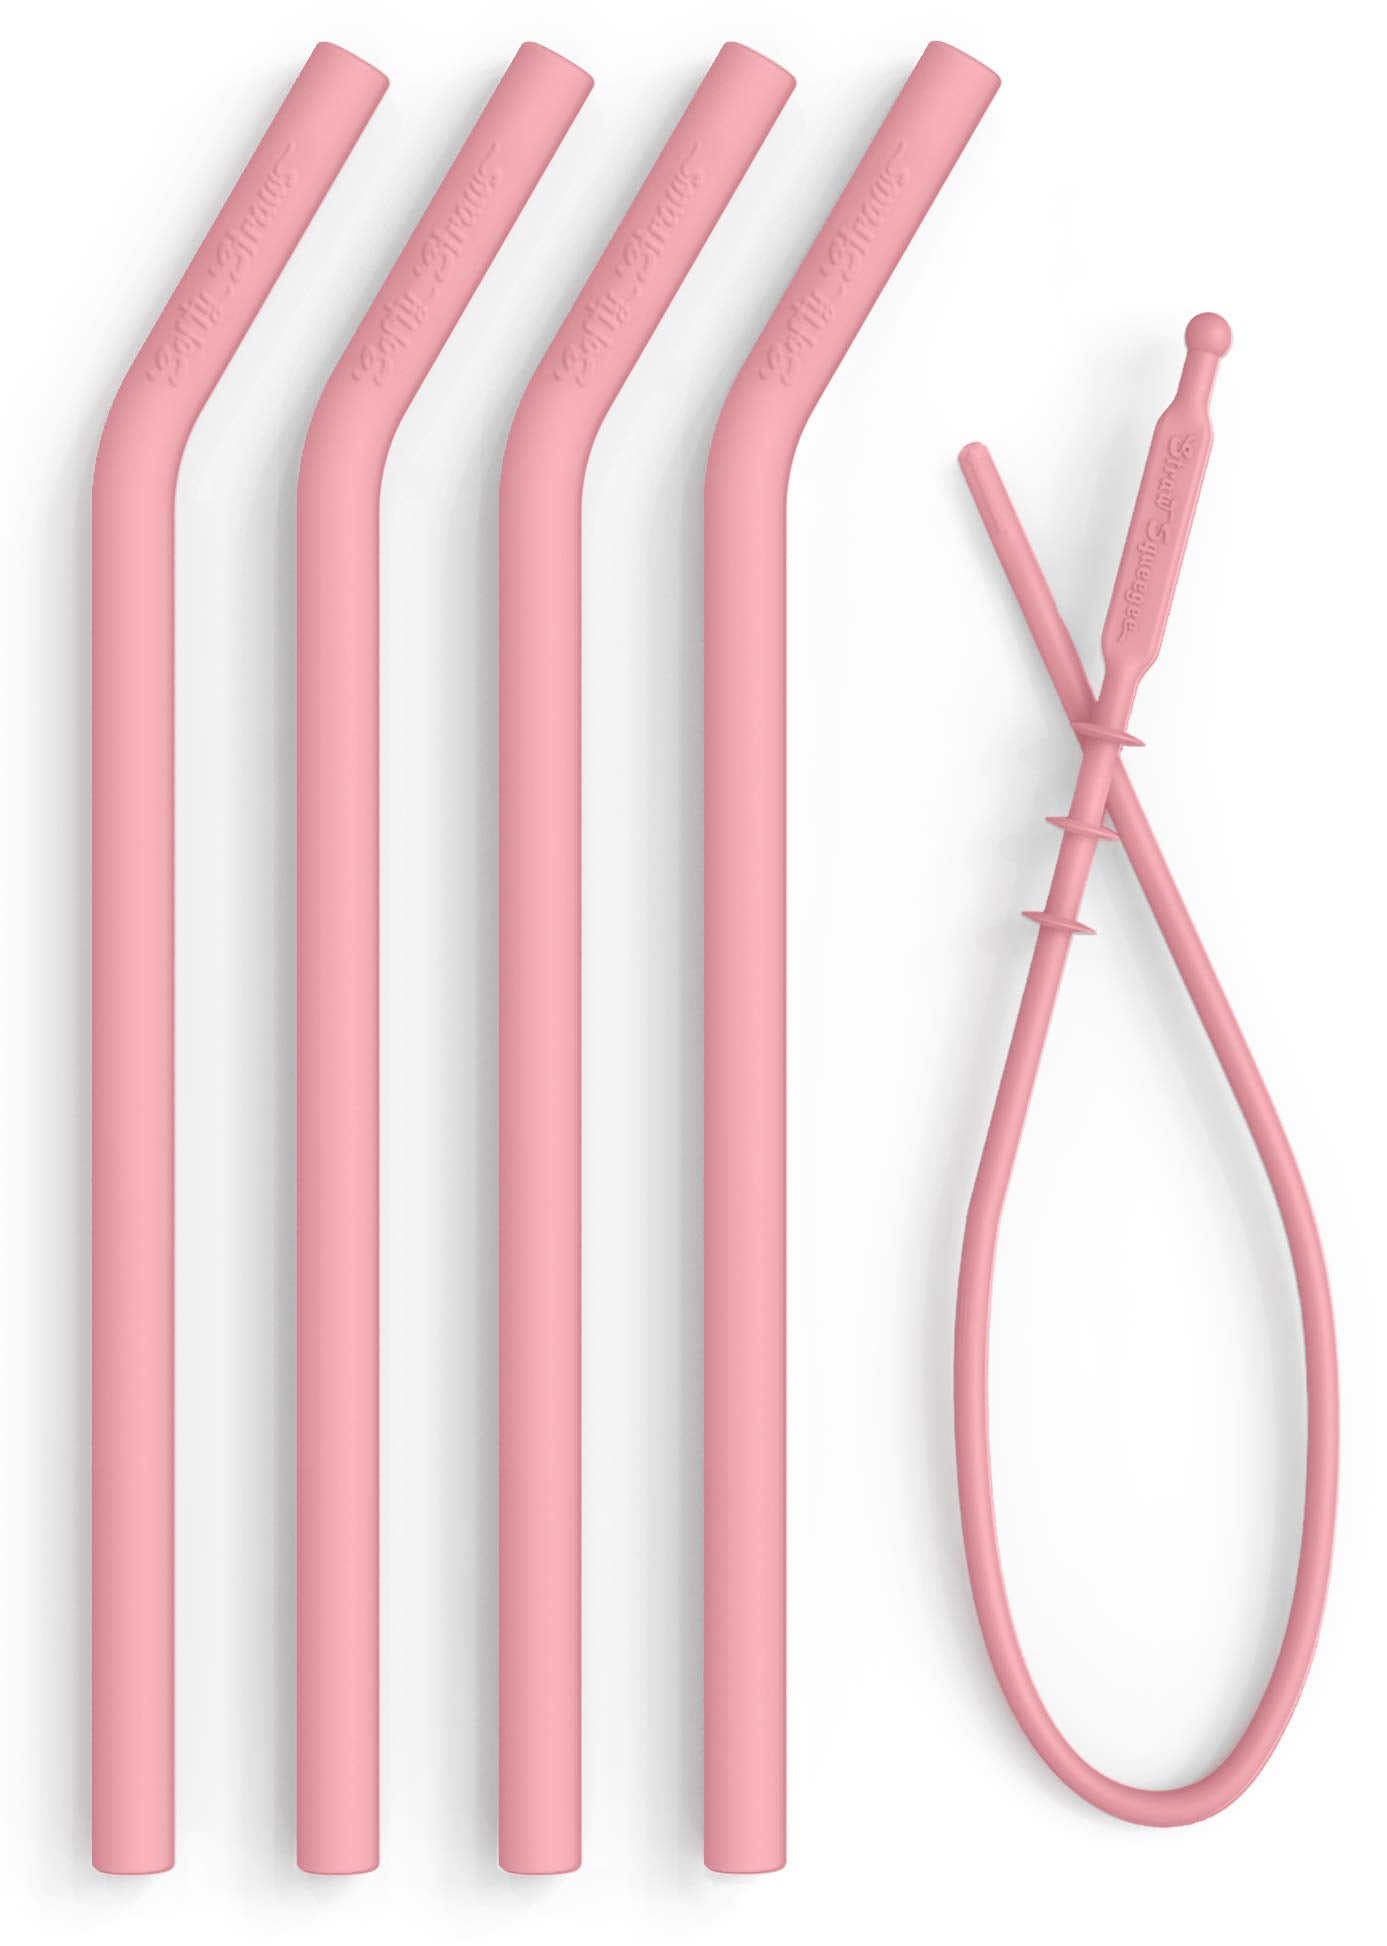 Softy Straws Premium Reusable Silicone Drinking Straws + Patented Straw Squeegee - 9” Long With Curved Bend for 20/30oz Tumblers - BPA Free (Non-Rubber), Flexible, Bendy, Safe for Kids / Toddlers